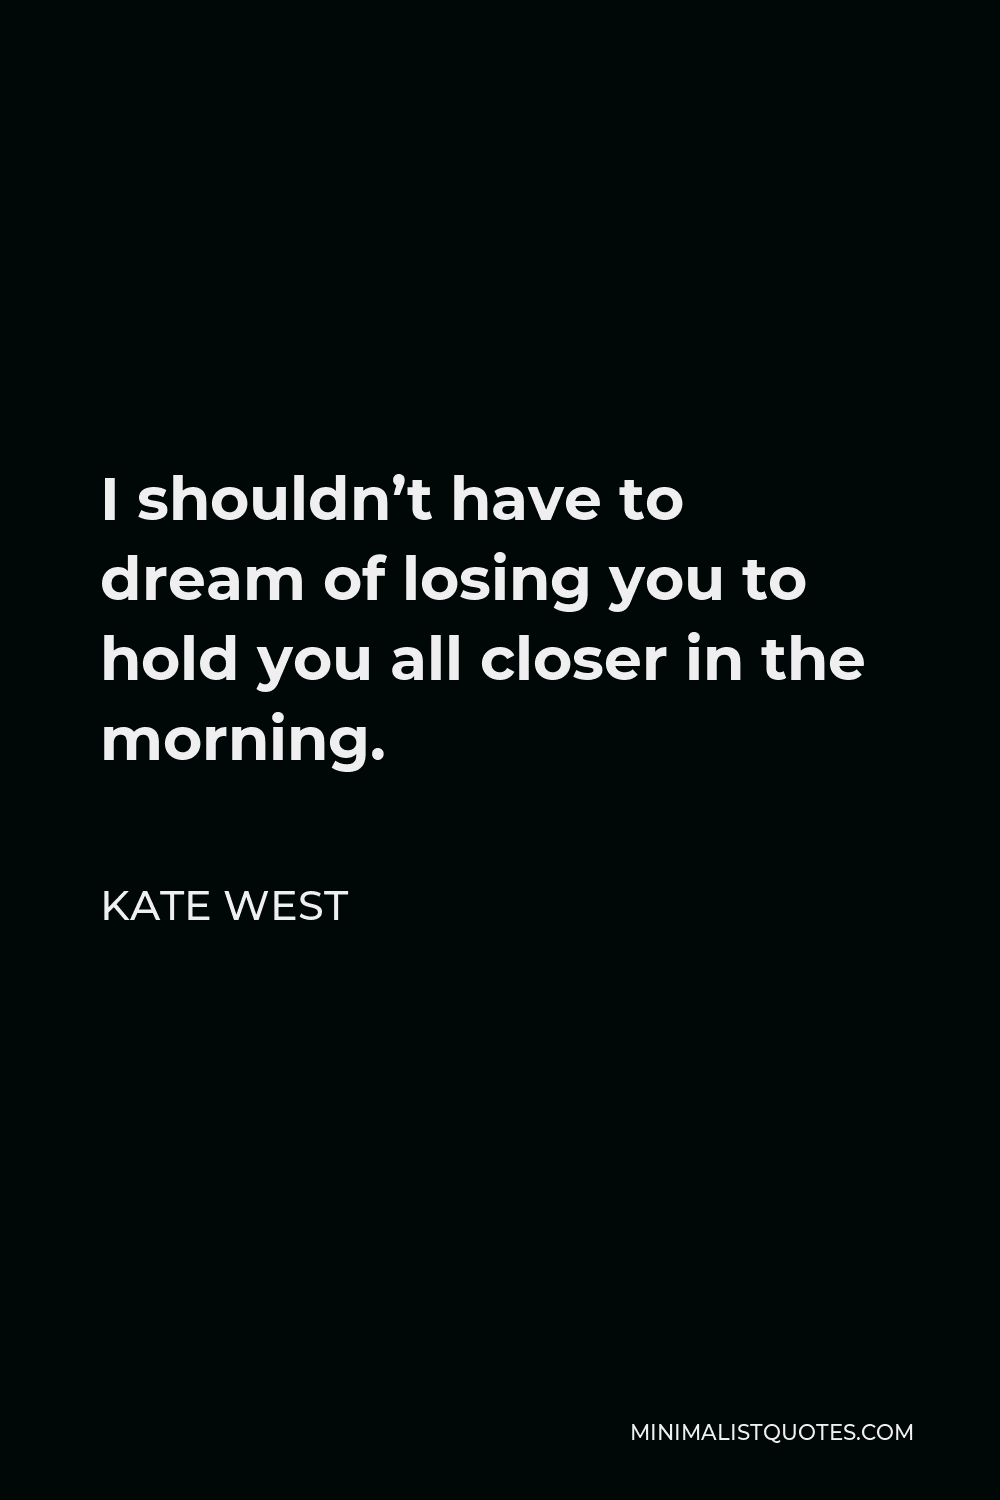 Kate West Quote - I shouldn’t have to dream of losing you to hold you all closer in the morning.